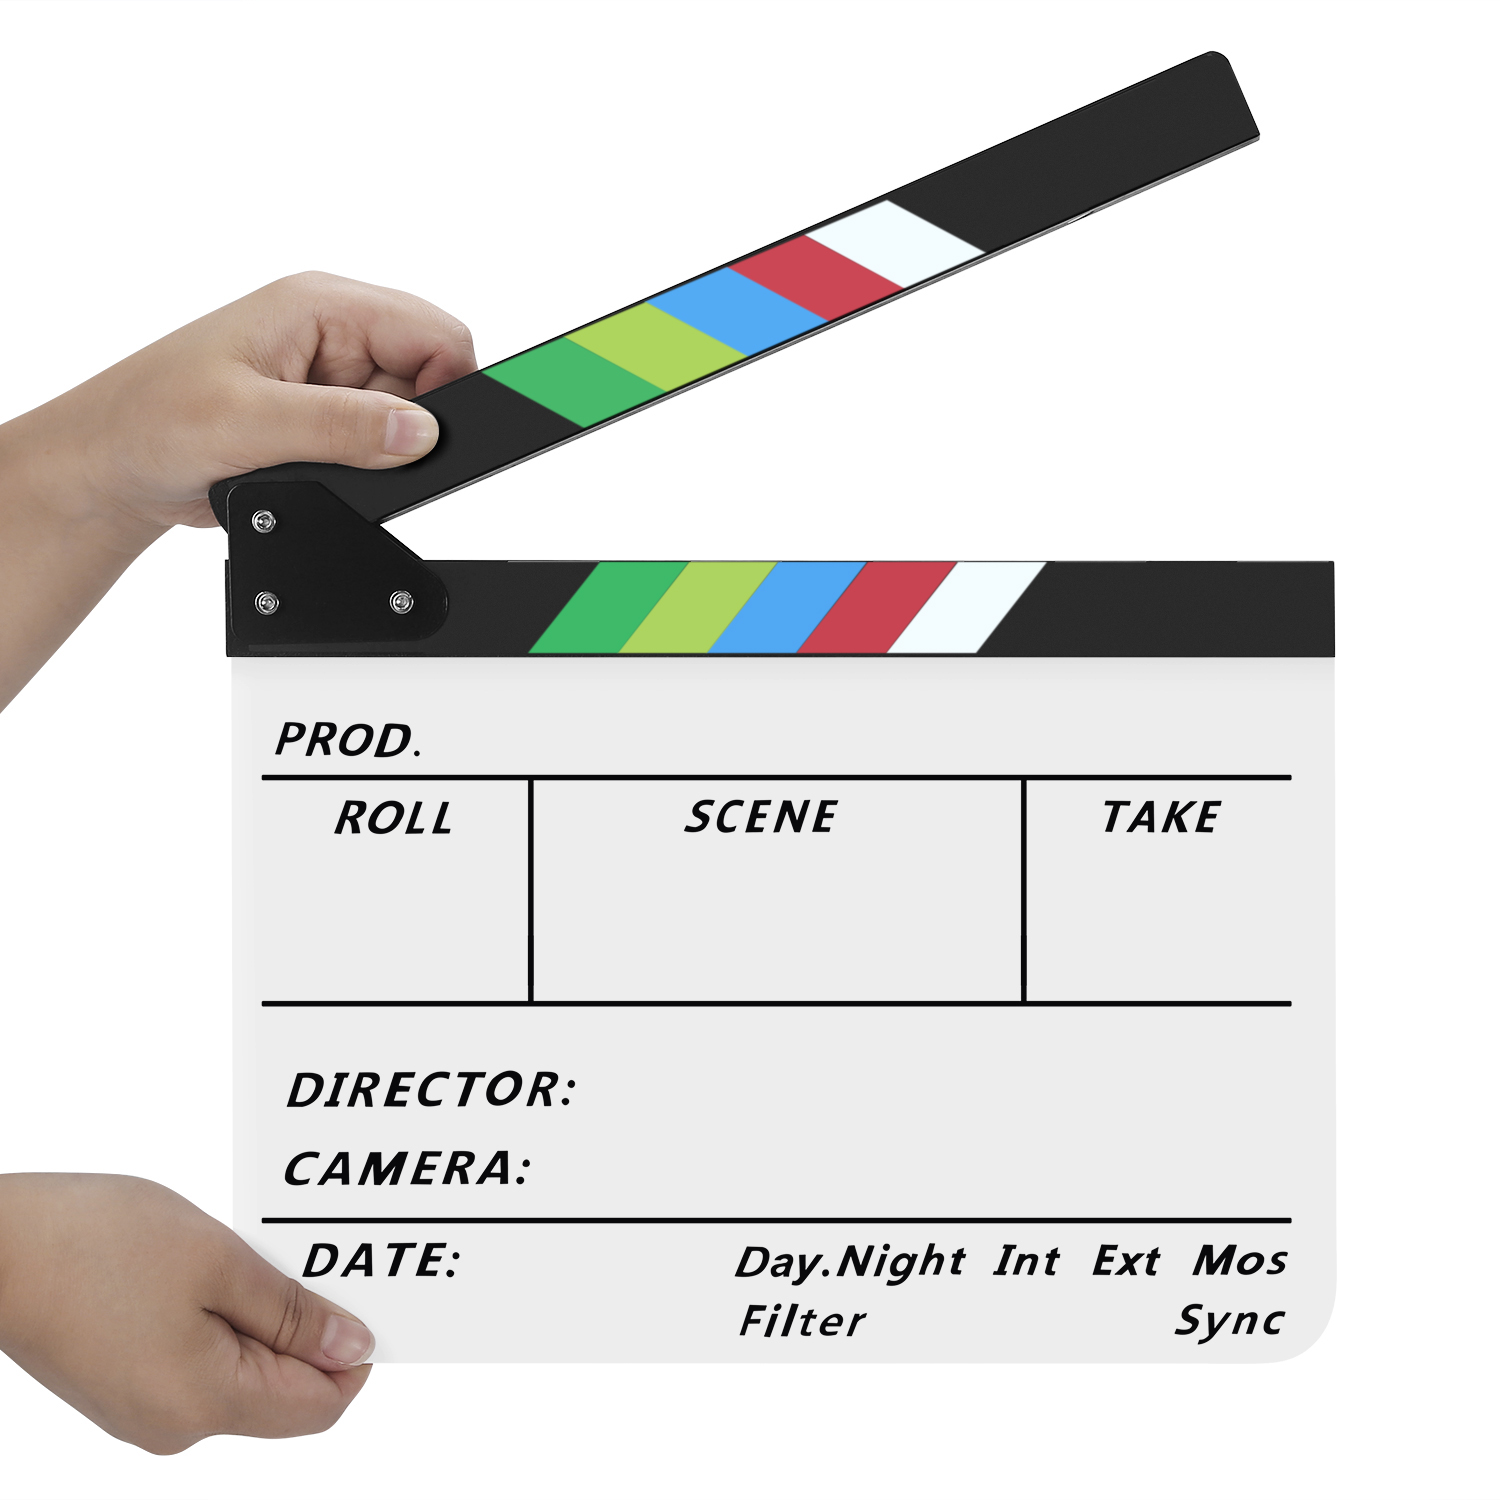 Multi-Use The film clapboard can be used to shoot videos, movies, films, TV shows and advertisements. It can be used as a theater props and  suitable for microfilm shooting